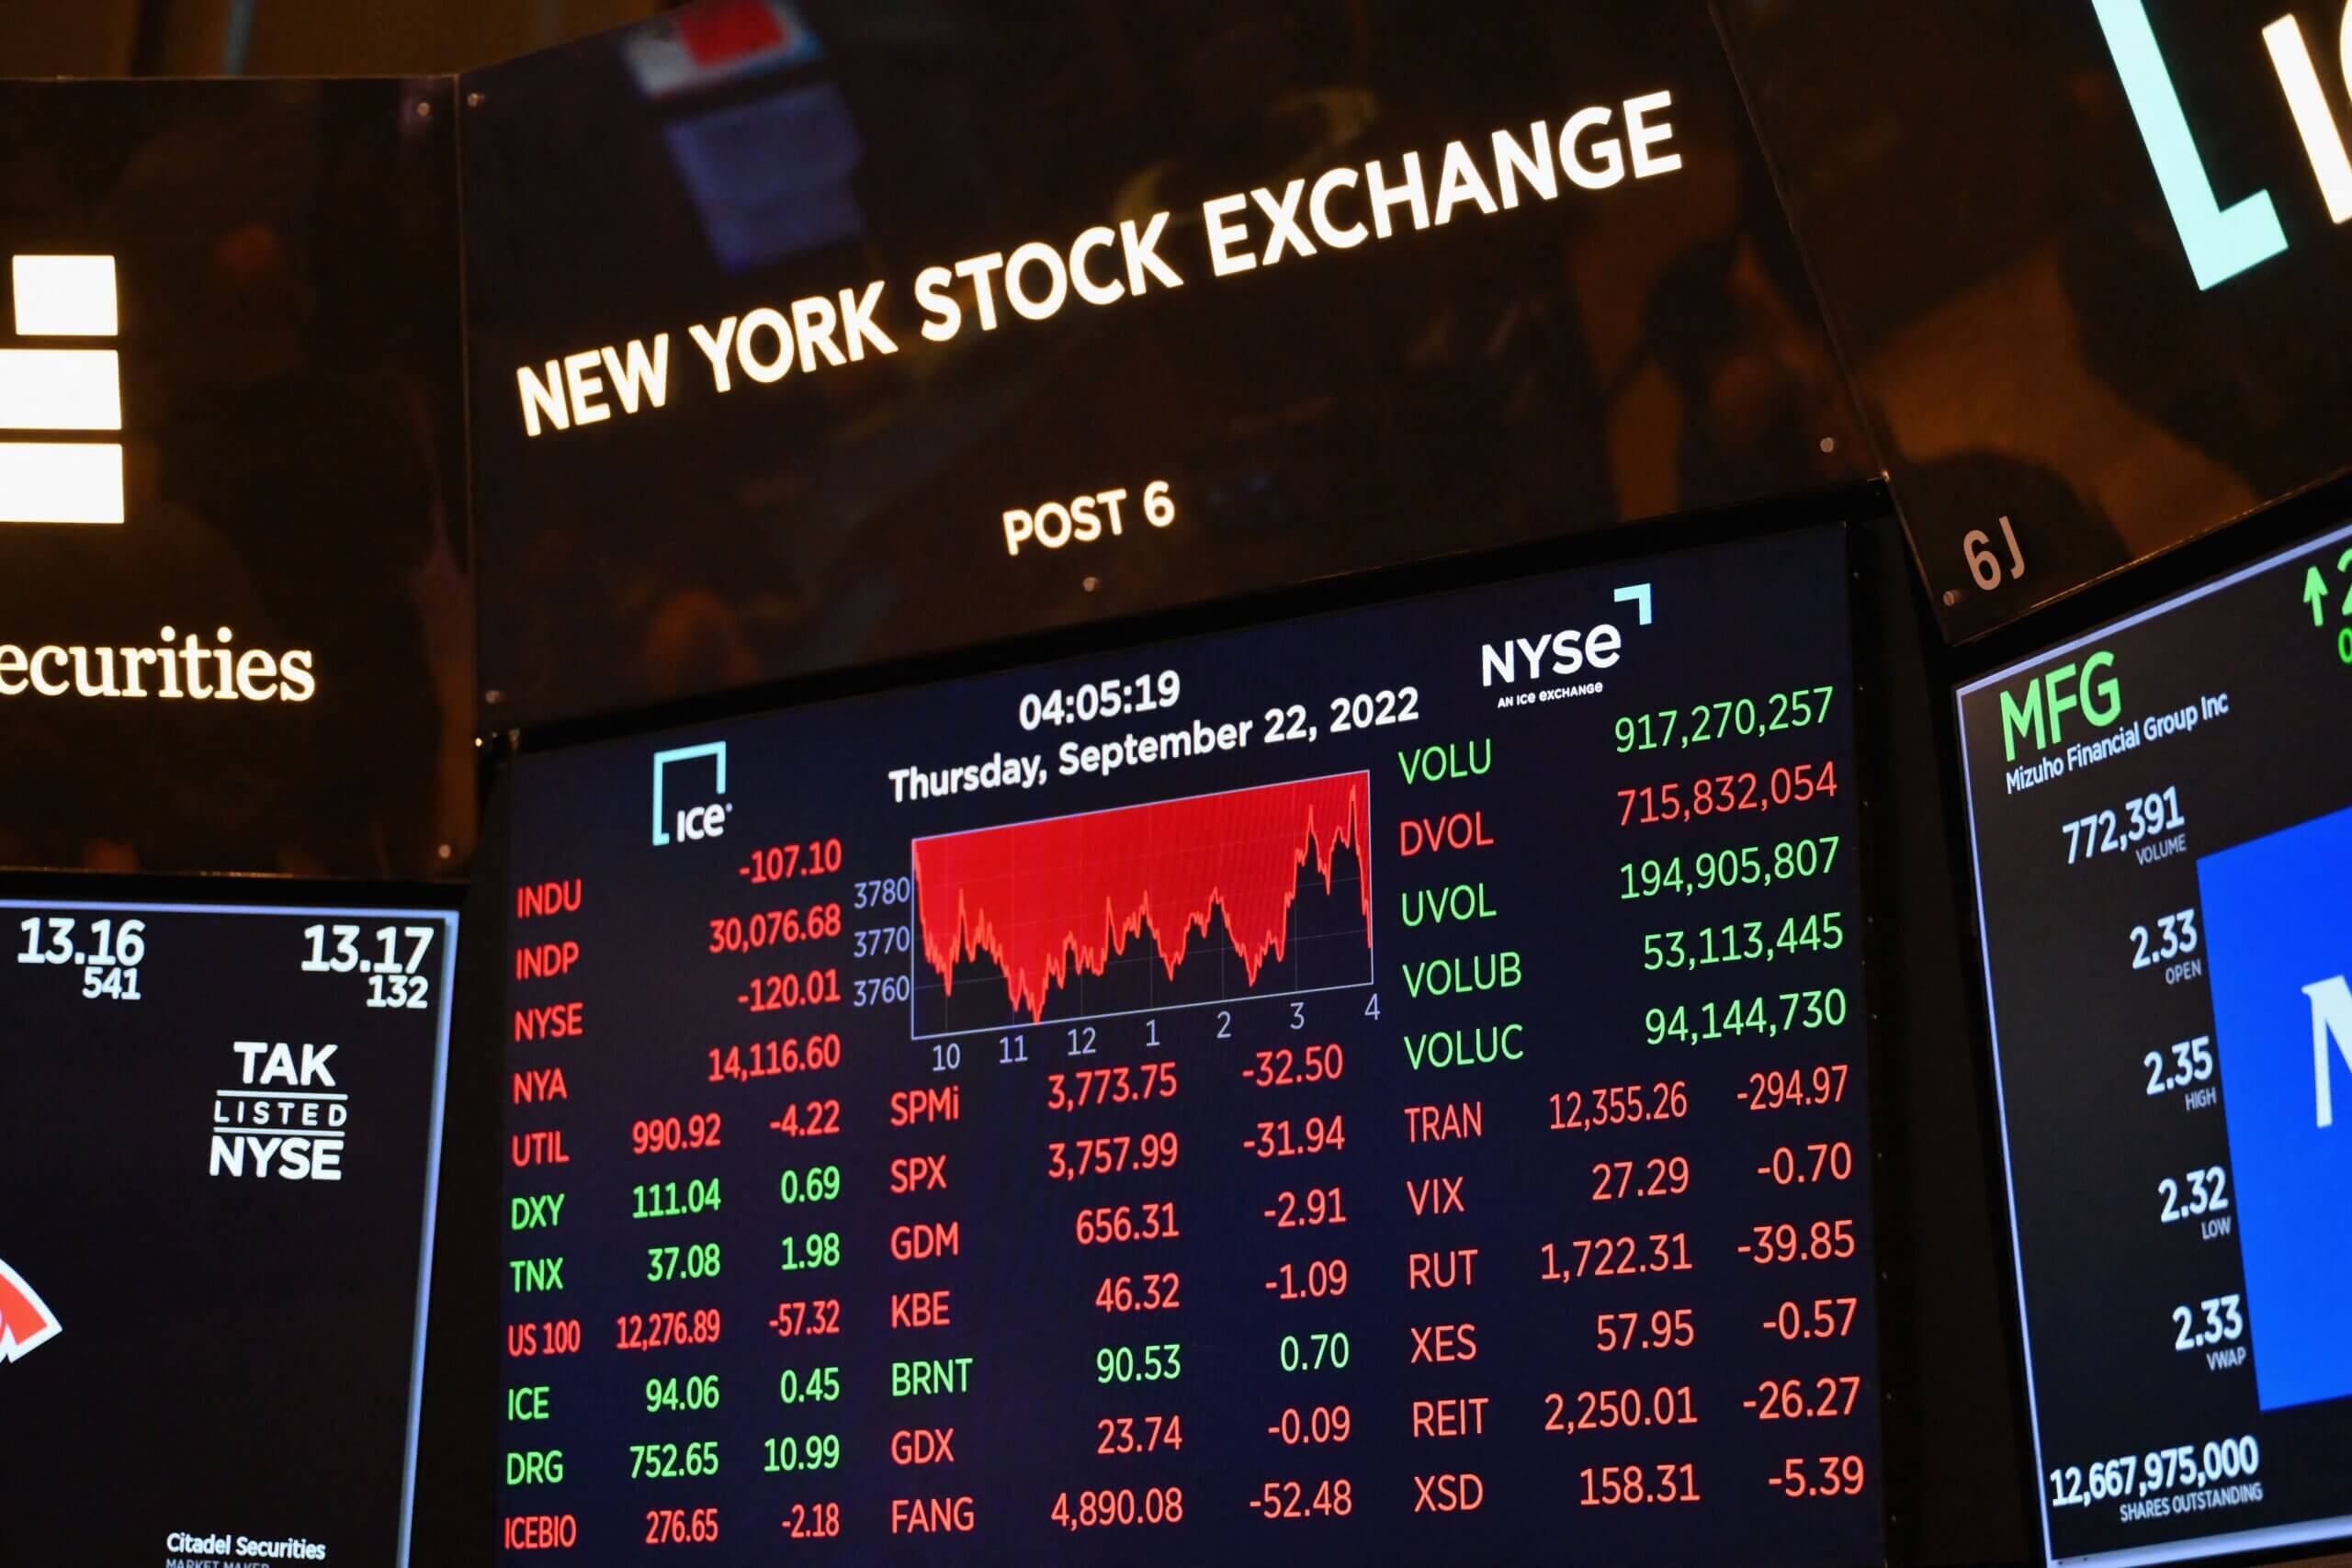 Closing numbers of the NYSE on Sept. 22, 2022.